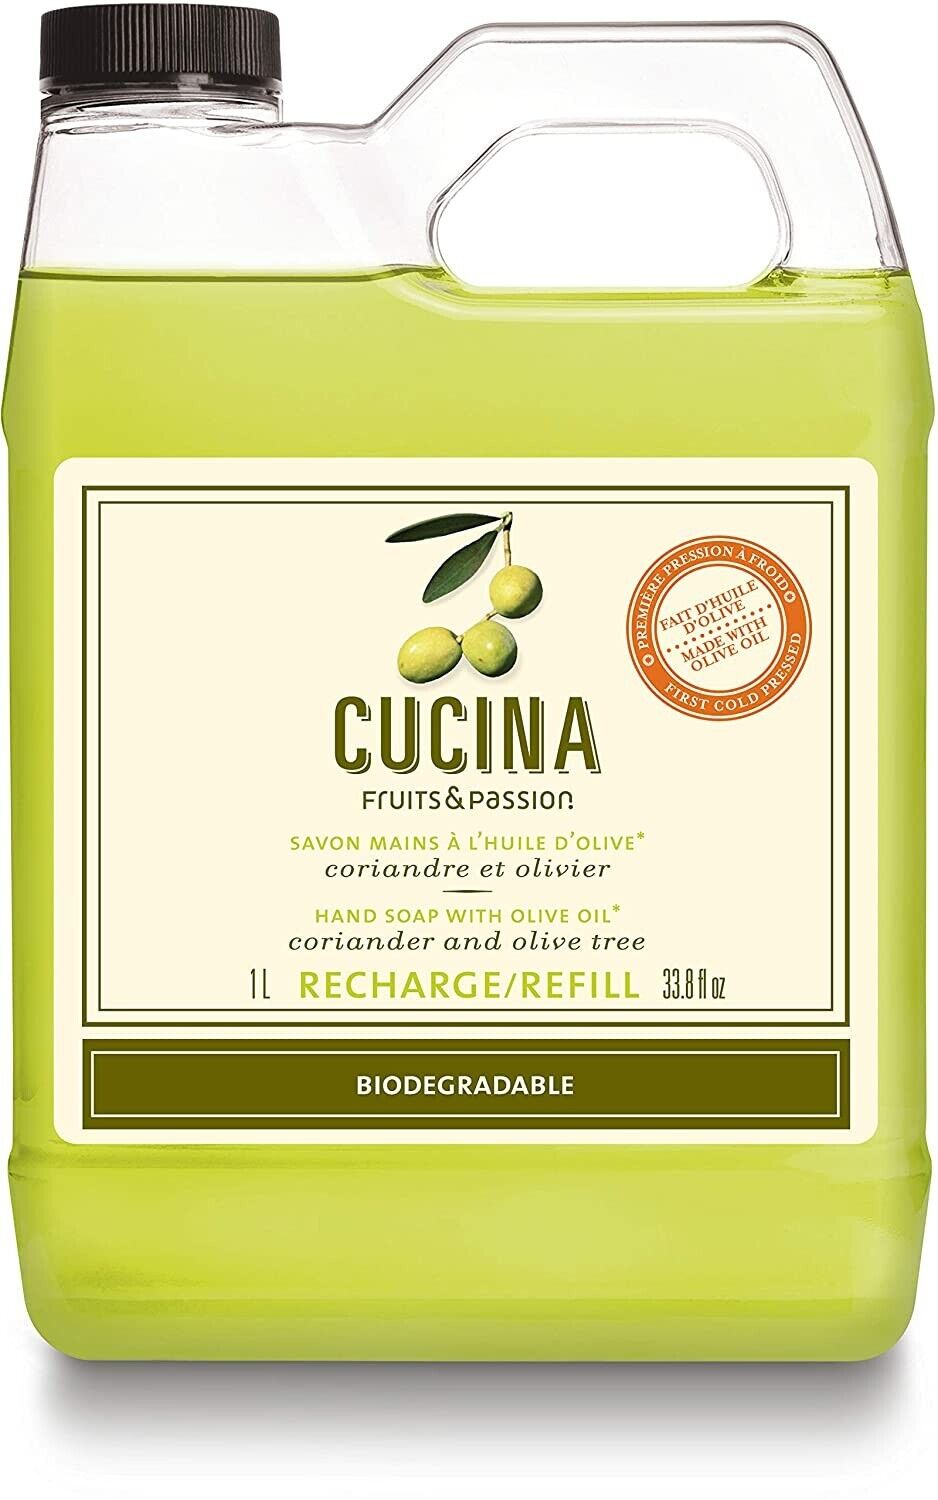 CUCINA FRUITS & PASSION LIME AND ZEST HAND SOAP - 6 pack of 33.8 OZ REFILL(6 PAK)